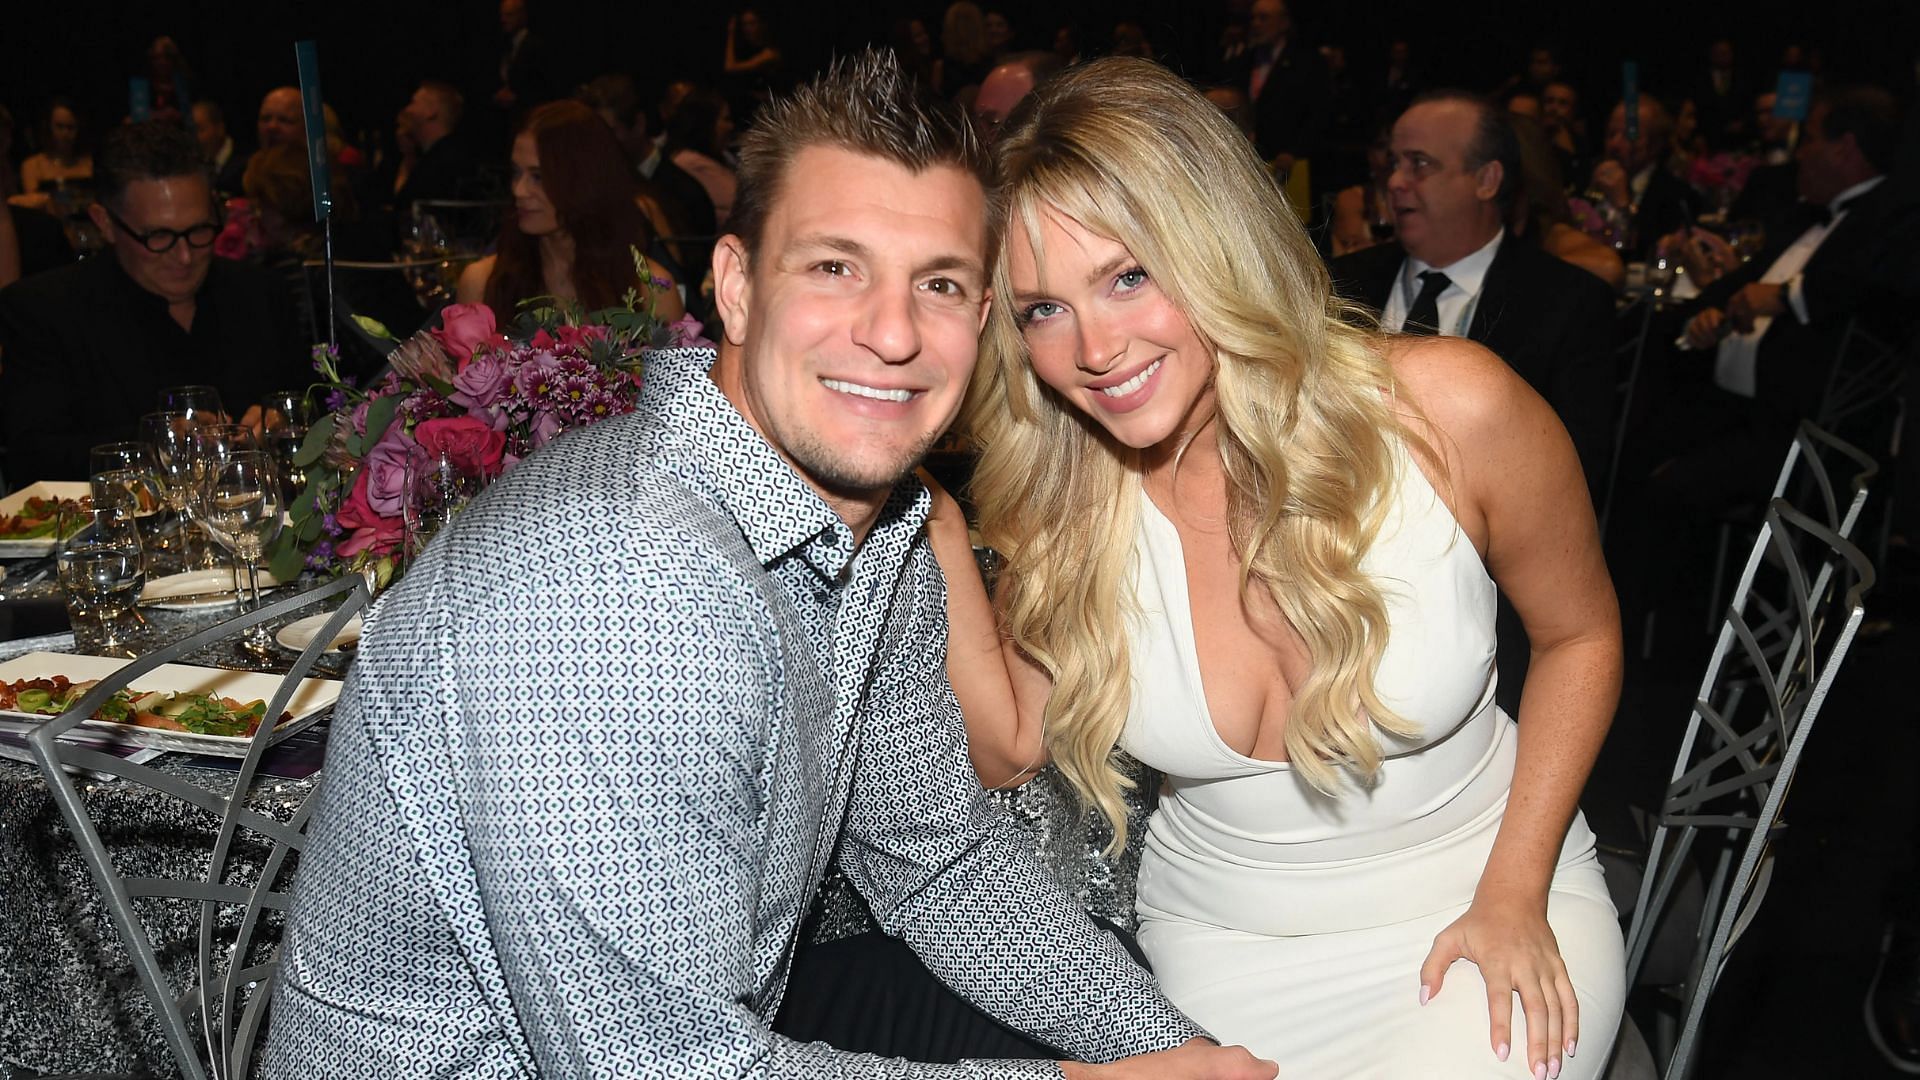 Camille Kostek shares the scoop on a healthy and loving relation with Rob Gronkowski.